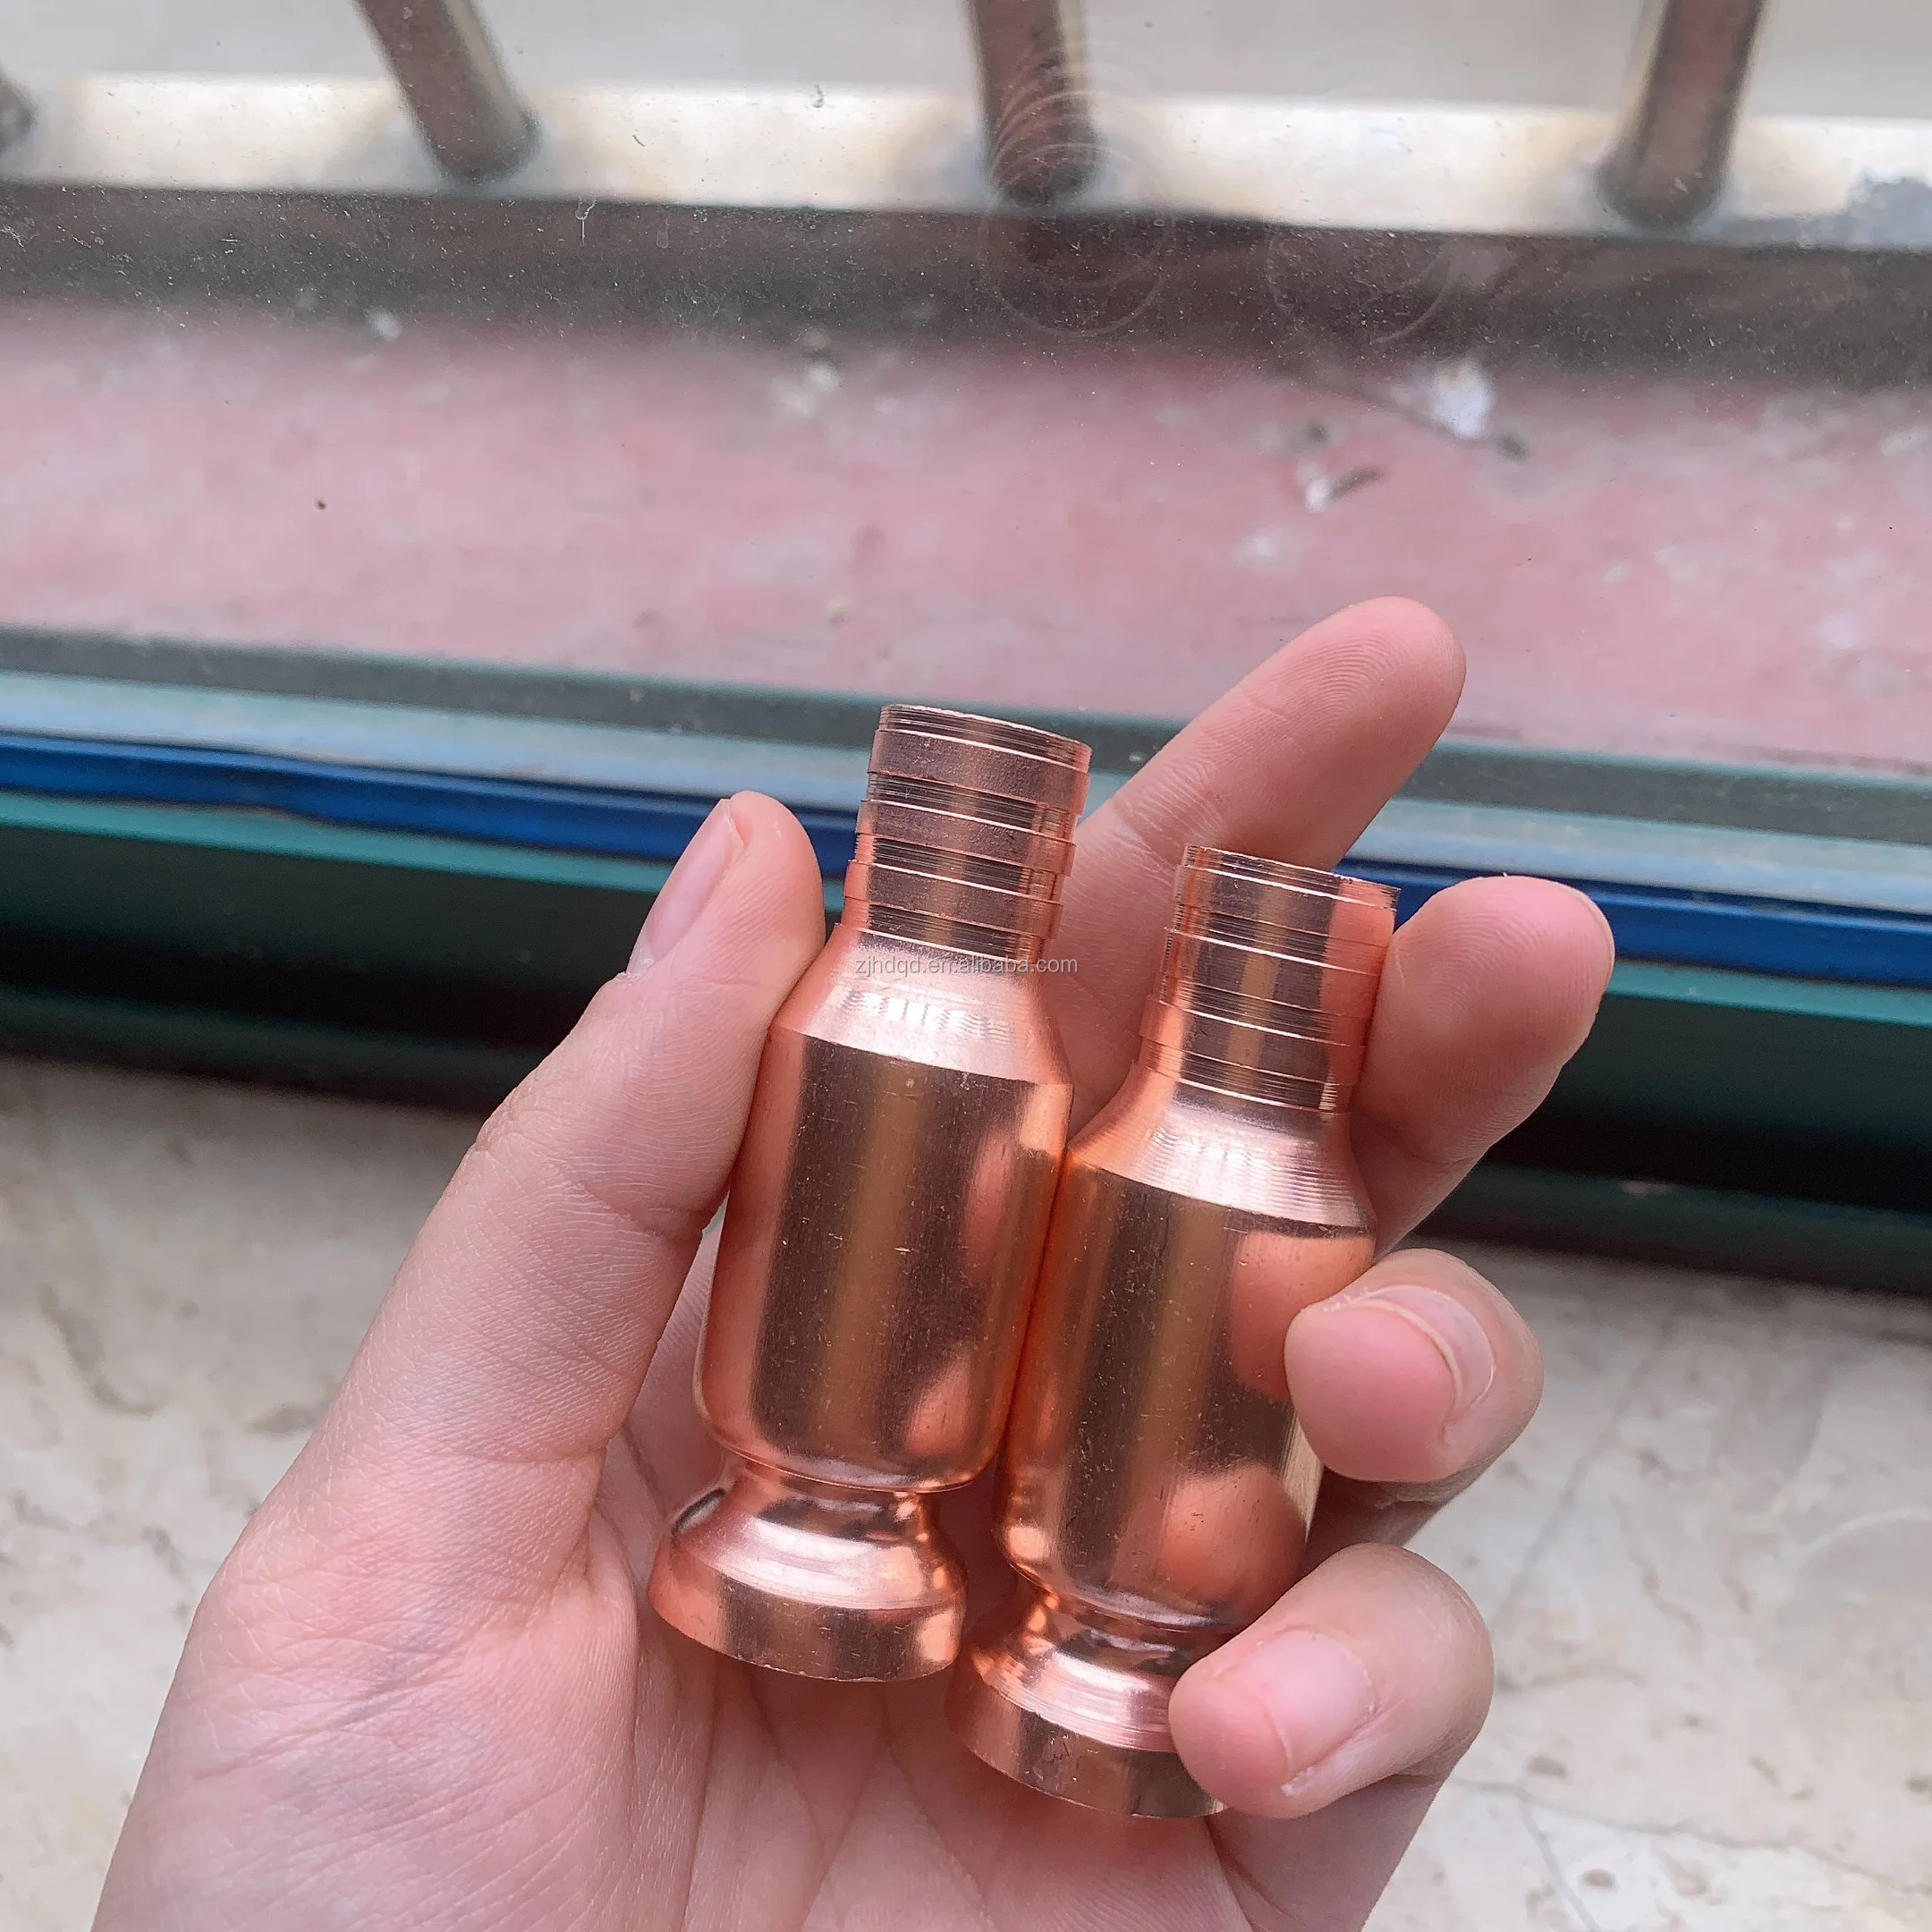 Jiggler Siphon Hose With Copper Nozzle Fitting 1 2 5 8 3 4 1 Super Anti Static Shaker Siphon Pump Buy Jiggler Siphon Product On Alibaba Com